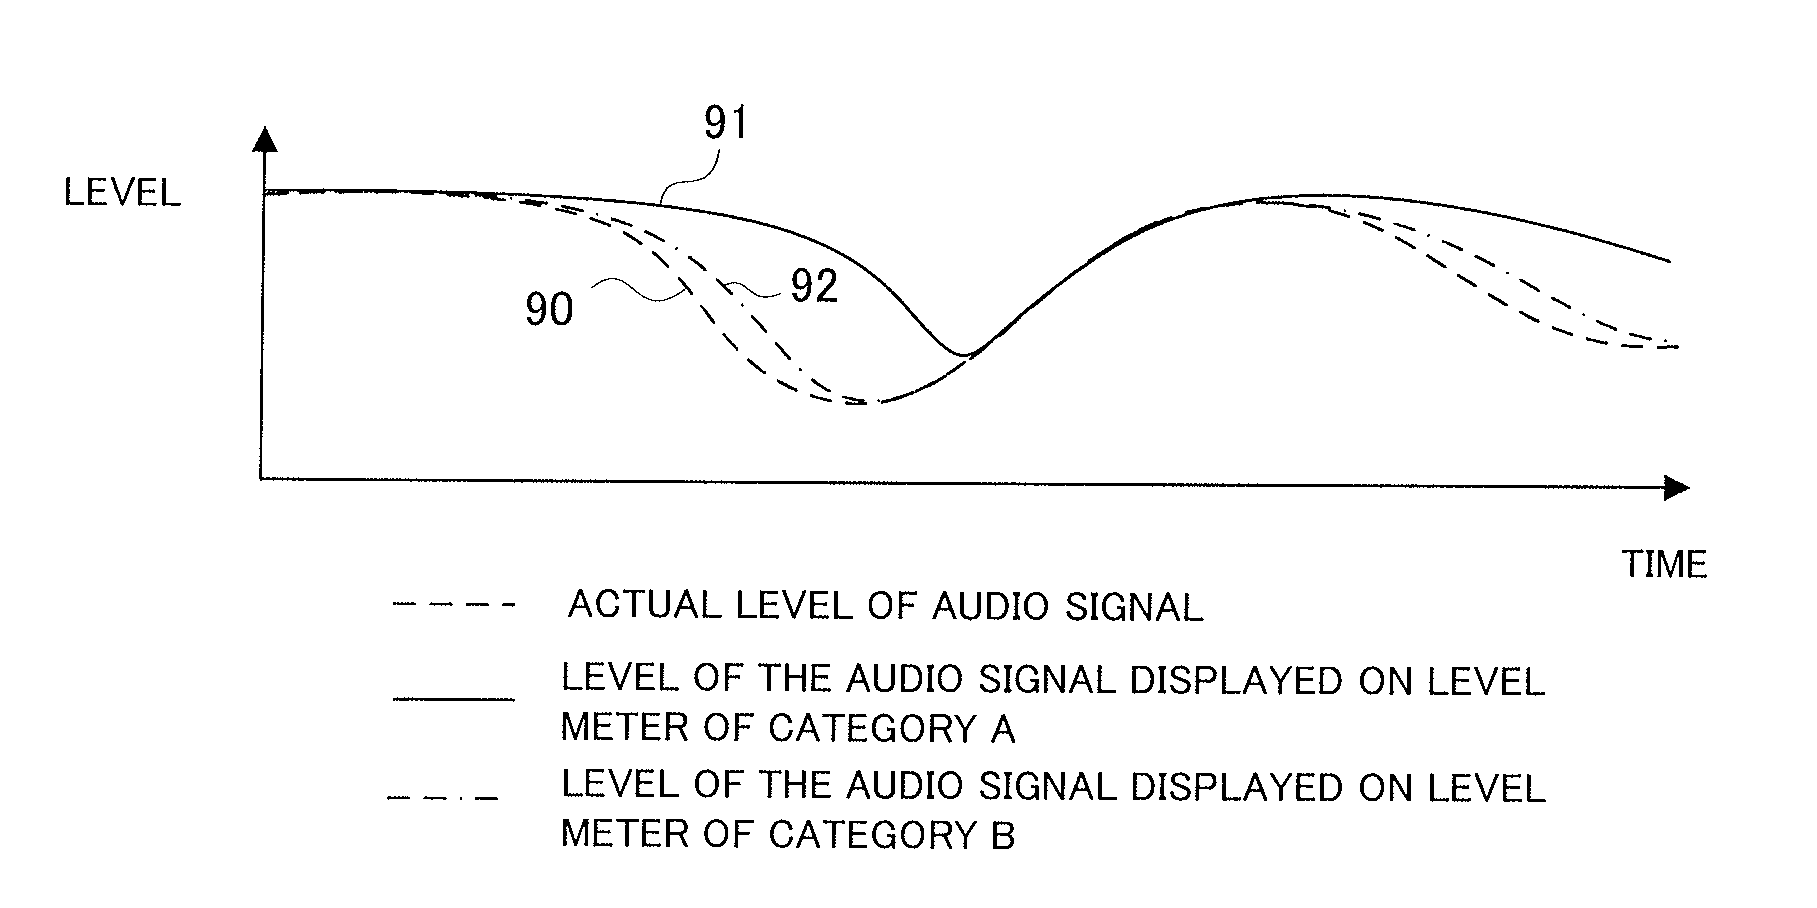 Displaying attenuating audio signal level in delayed fashion